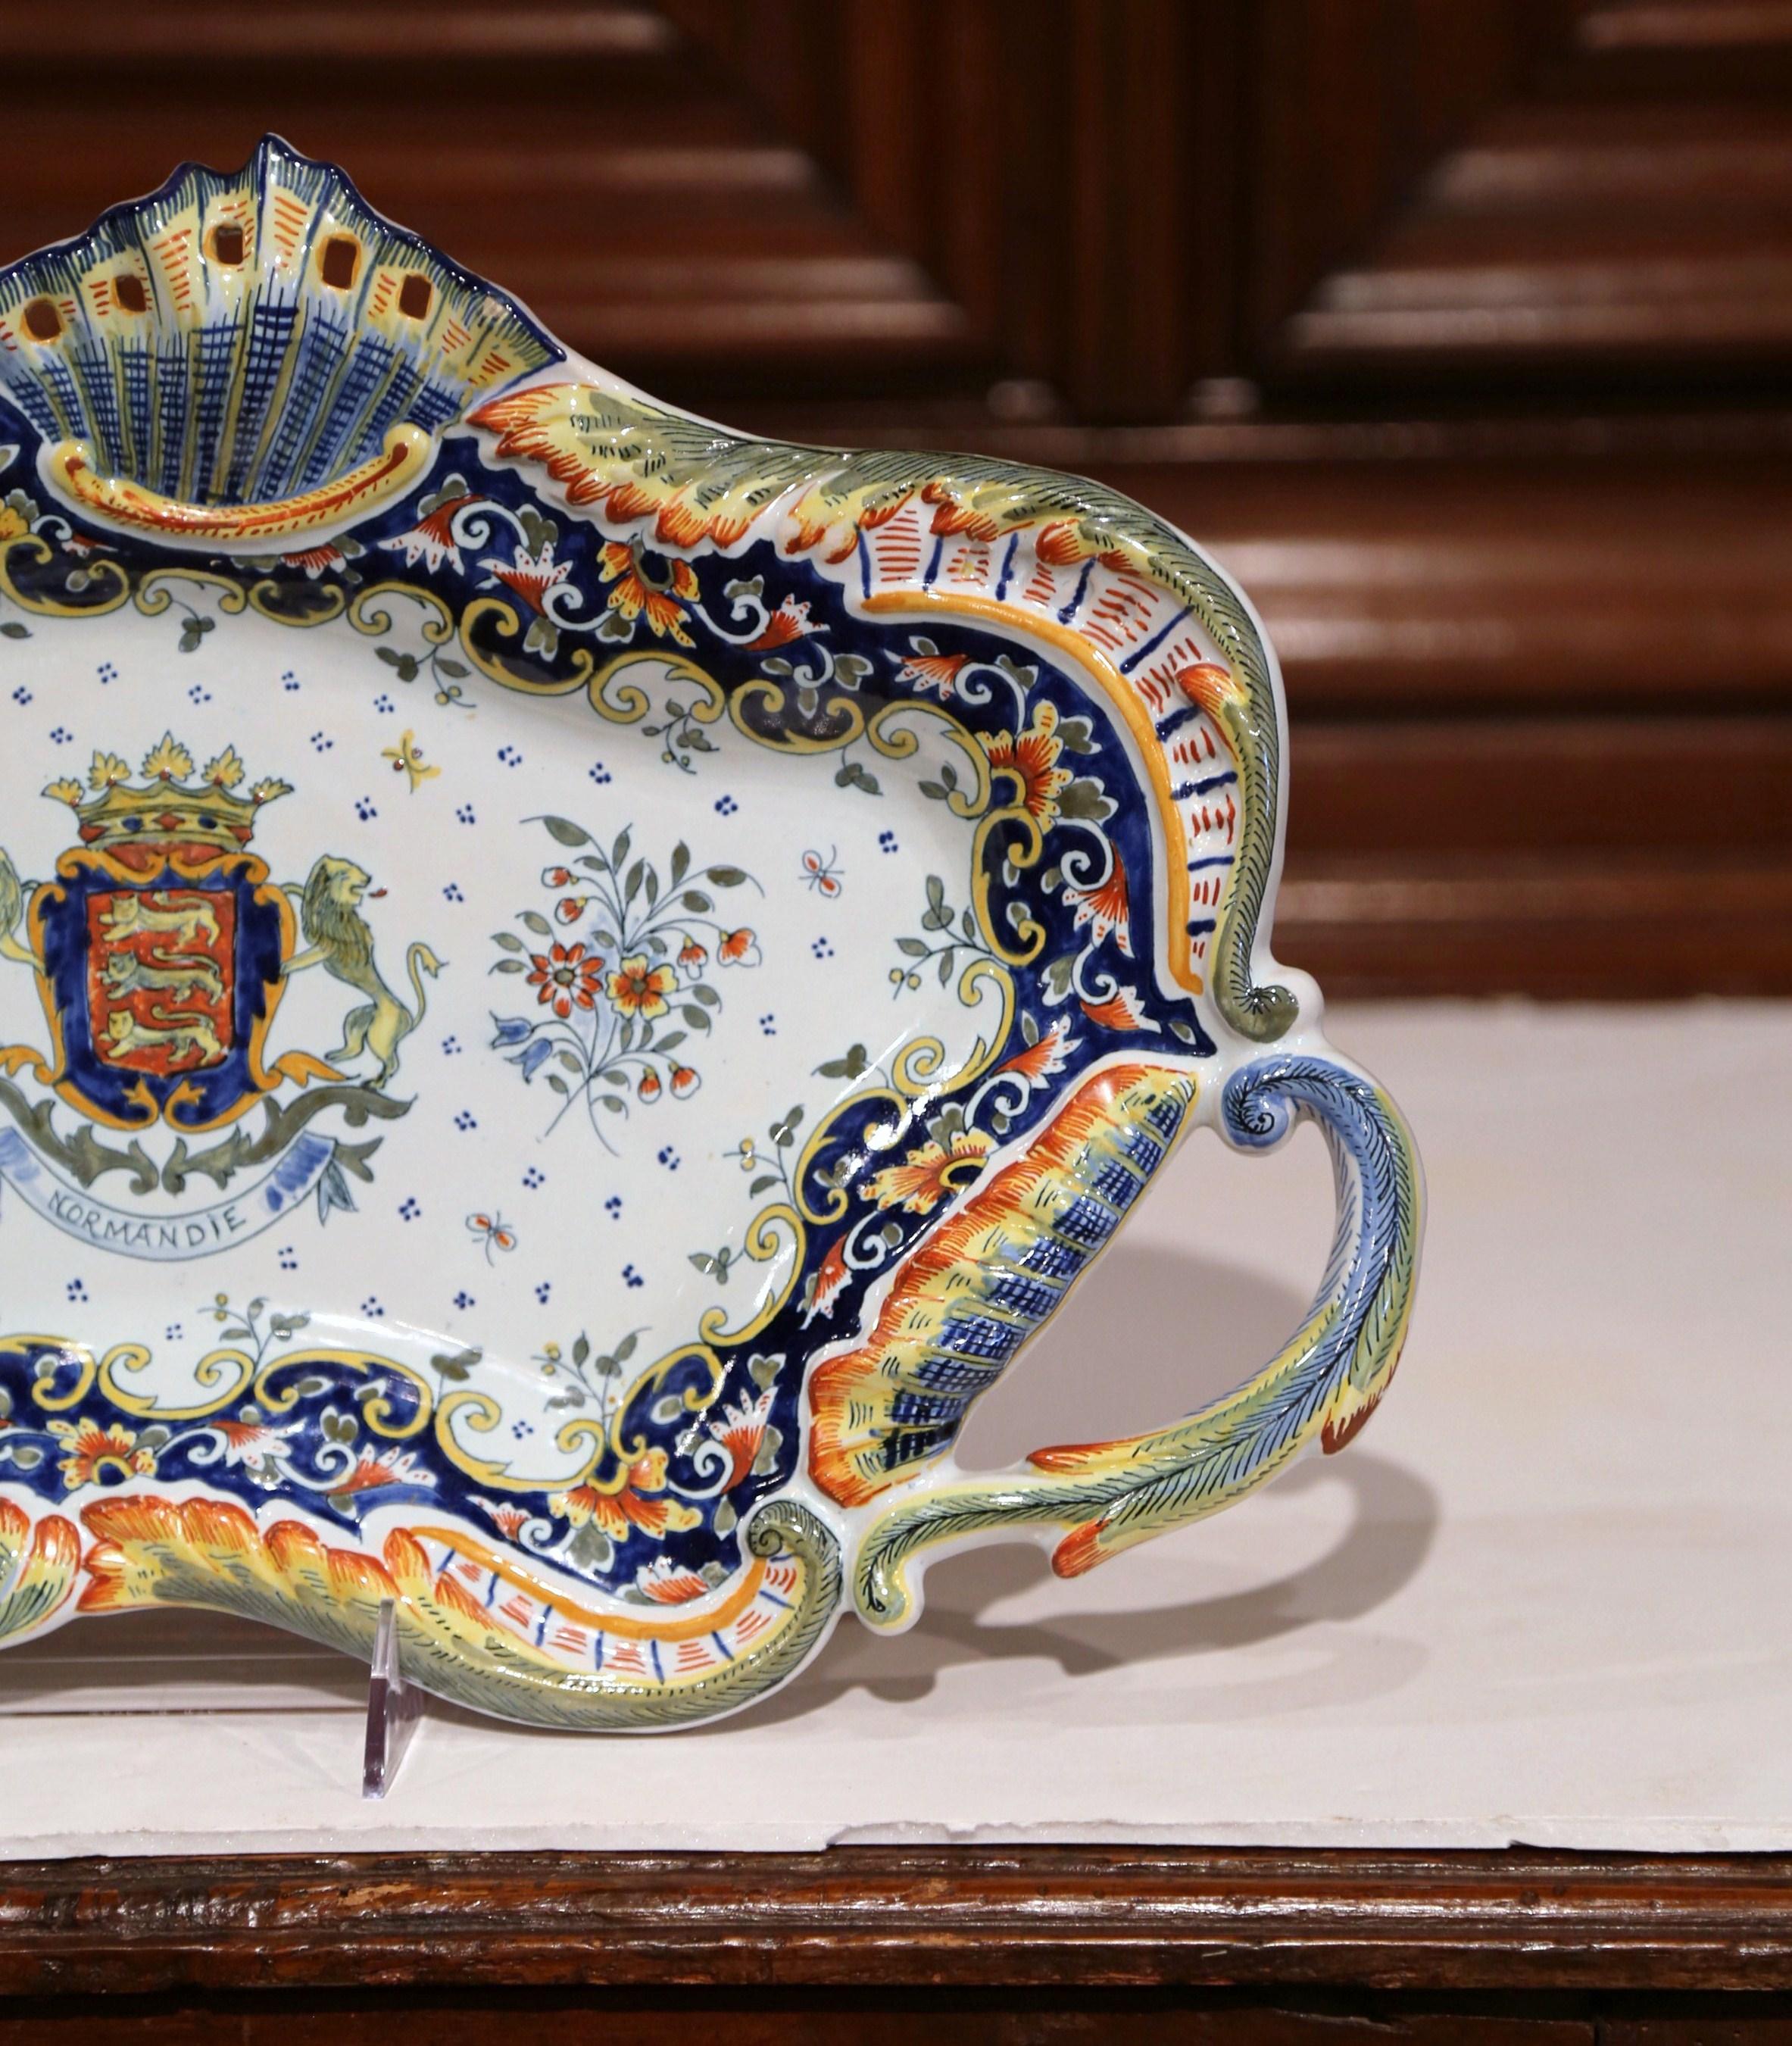 Ceramic Early 20th Century French Hand-Painted Faience Wall Platter from Normandy